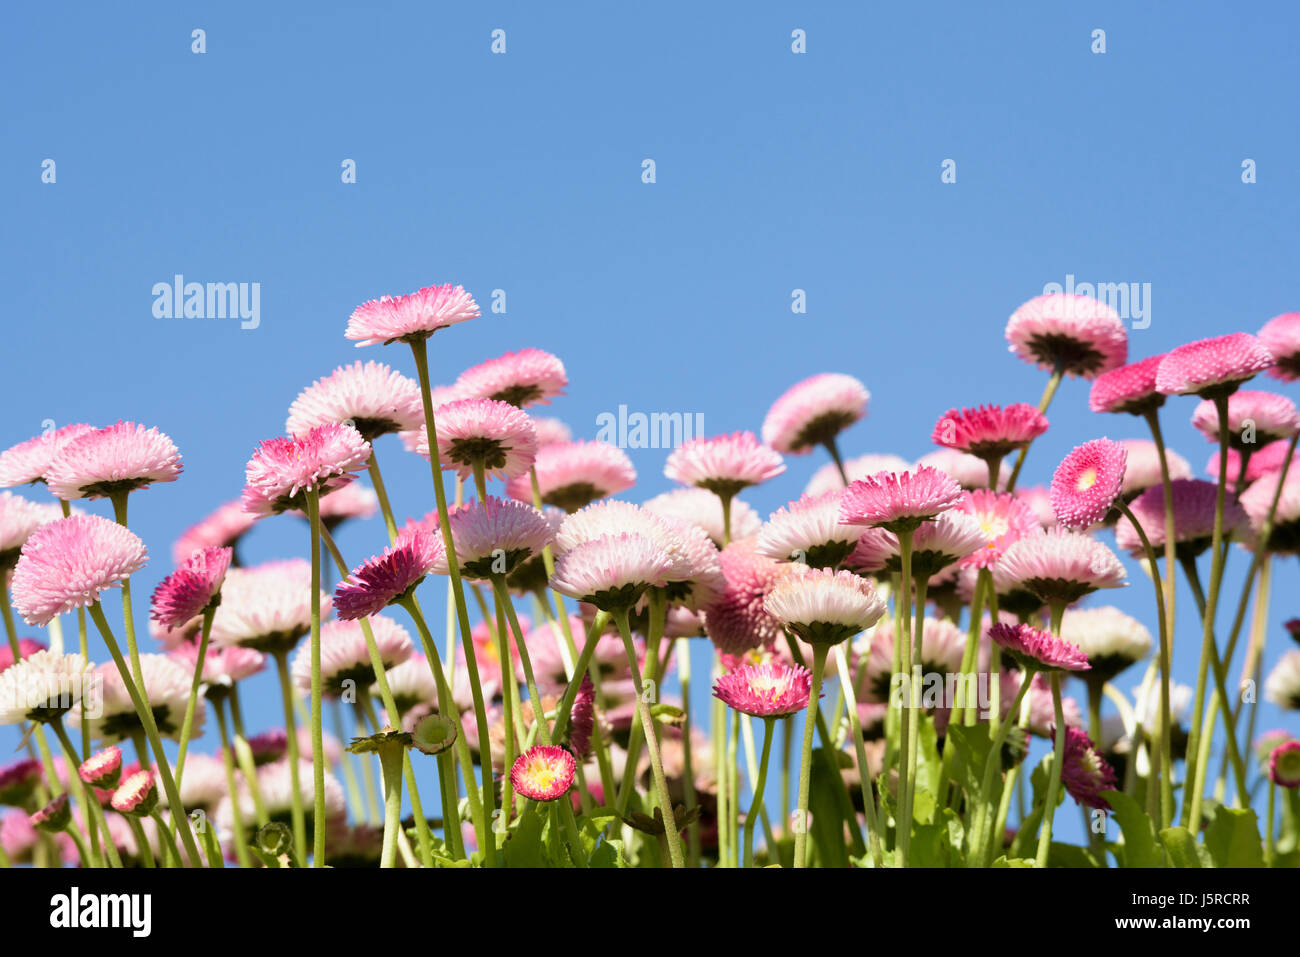 Daisy, Double daisy, Bellis perennis, side view of pink flowers growing outdoor. with blue sky behind. Stock Photo